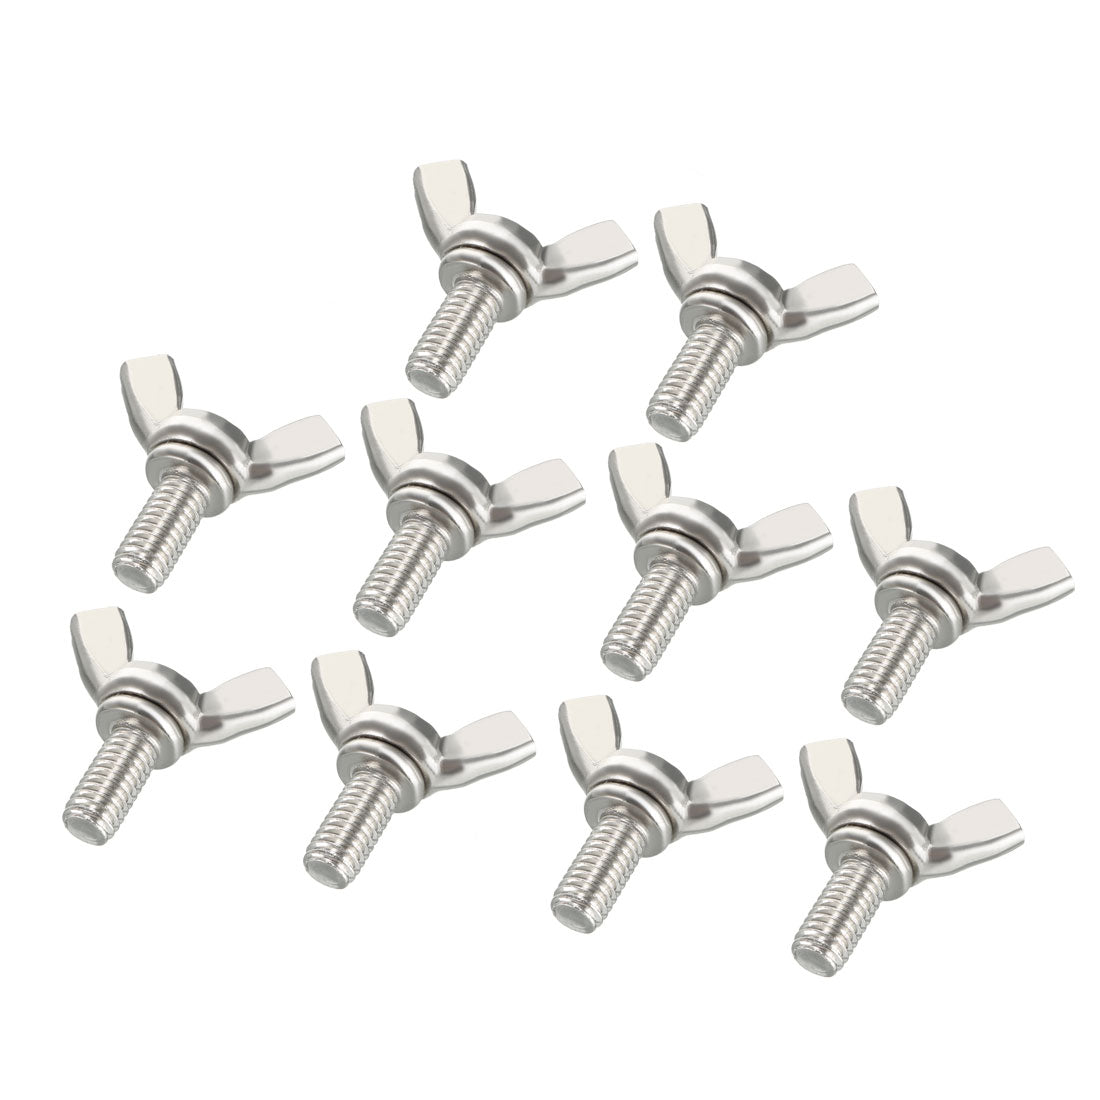 uxcell Uxcell Wingbolt Butterfly Wing Thumb Hand Screws Bolts M6x12mm 1mm Pitch Carbon Steel 10pcs